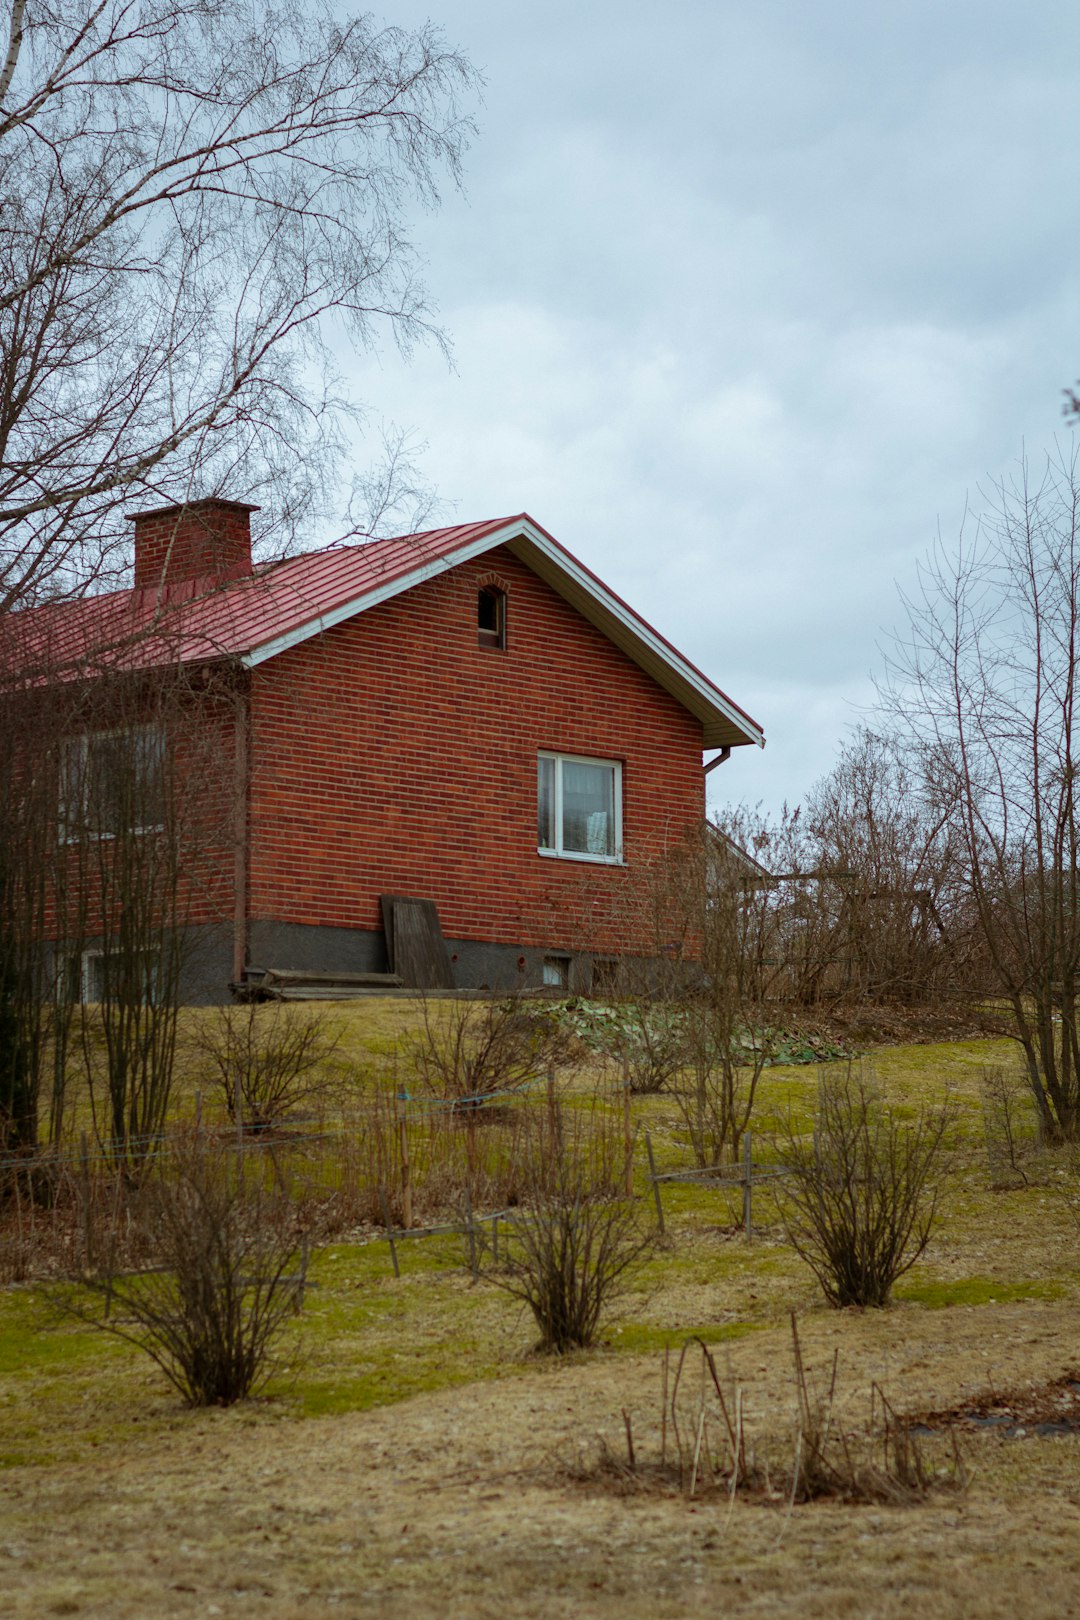 brown brick house near bare trees under cloudy sky during daytime